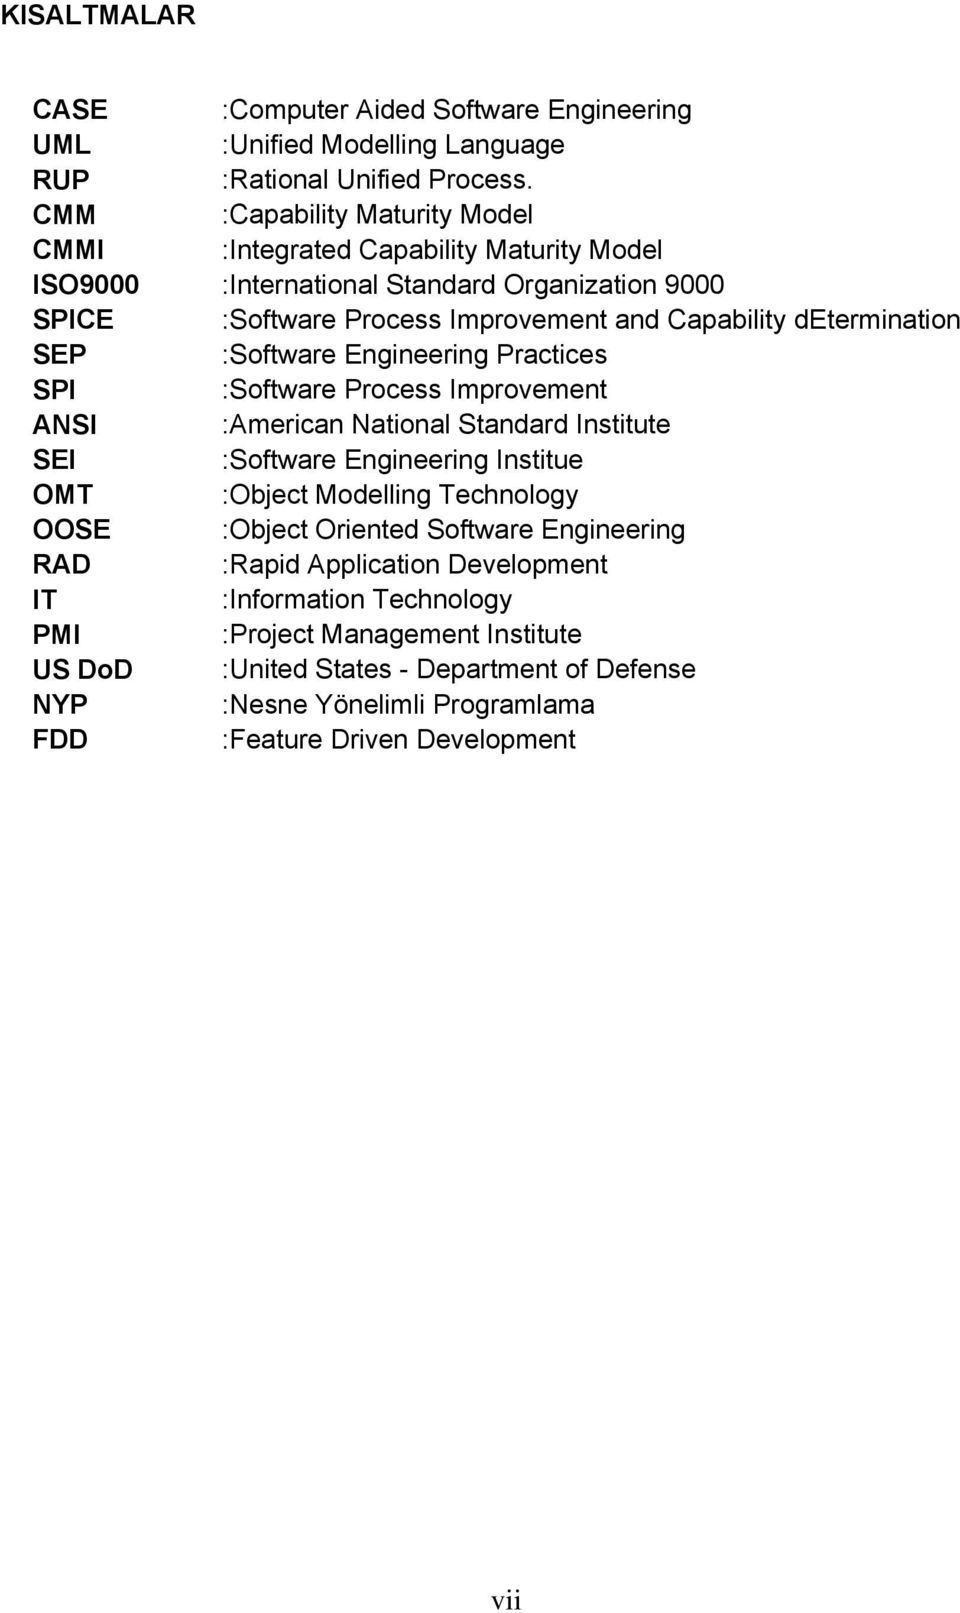 determination SEP :Software Engineering Practices SPI :Software Process Improvement ANSI :American National Standard Institute SEI :Software Engineering Institue OMT :Object Modelling